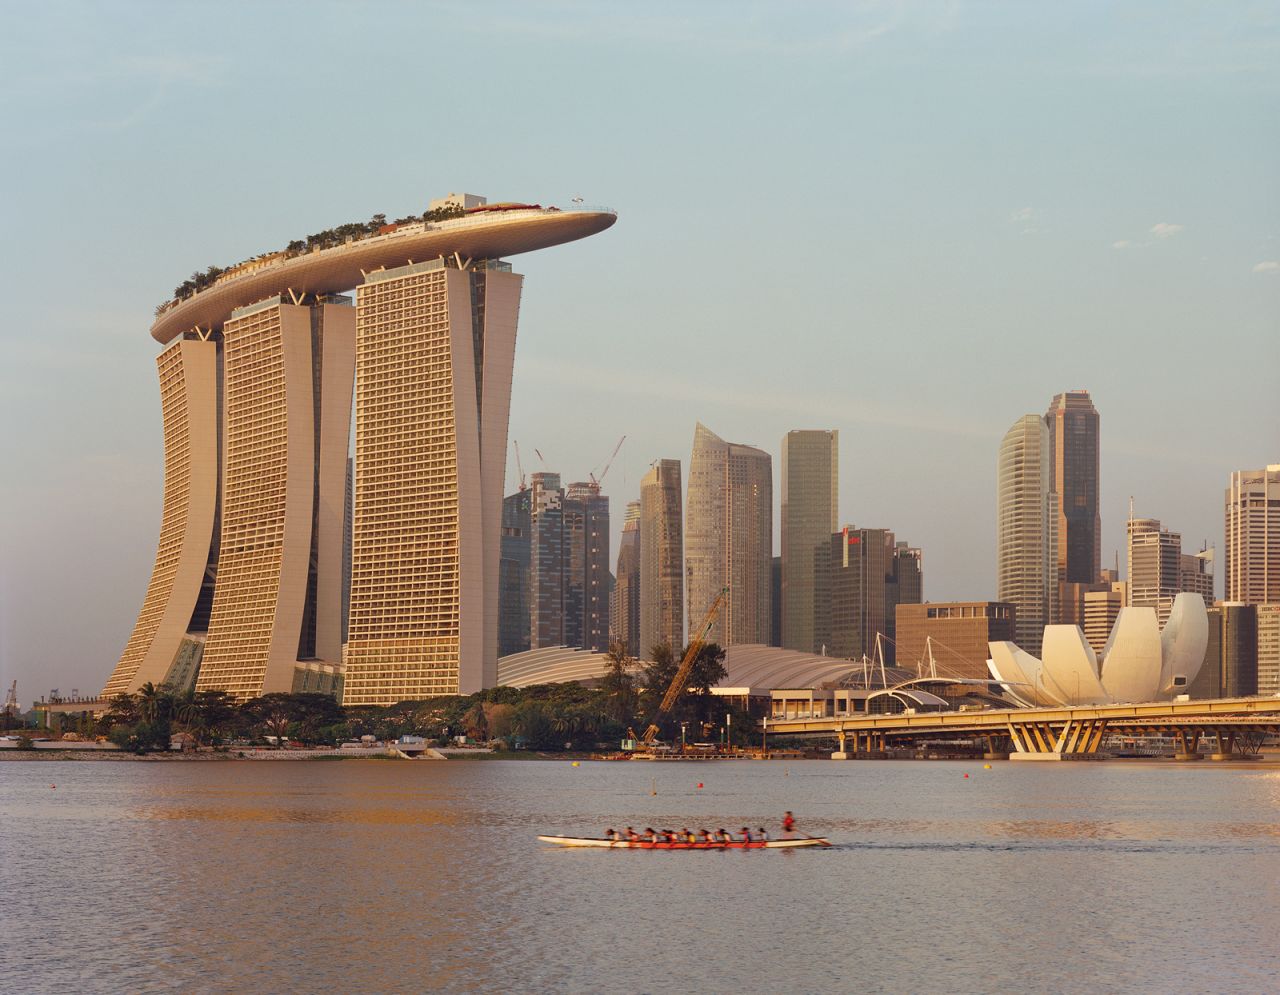 In creating Marina Bay Sands, Safdie says he wanted to design a "mixing bowl" where the world meets Singapore, and Singapore meets the world.